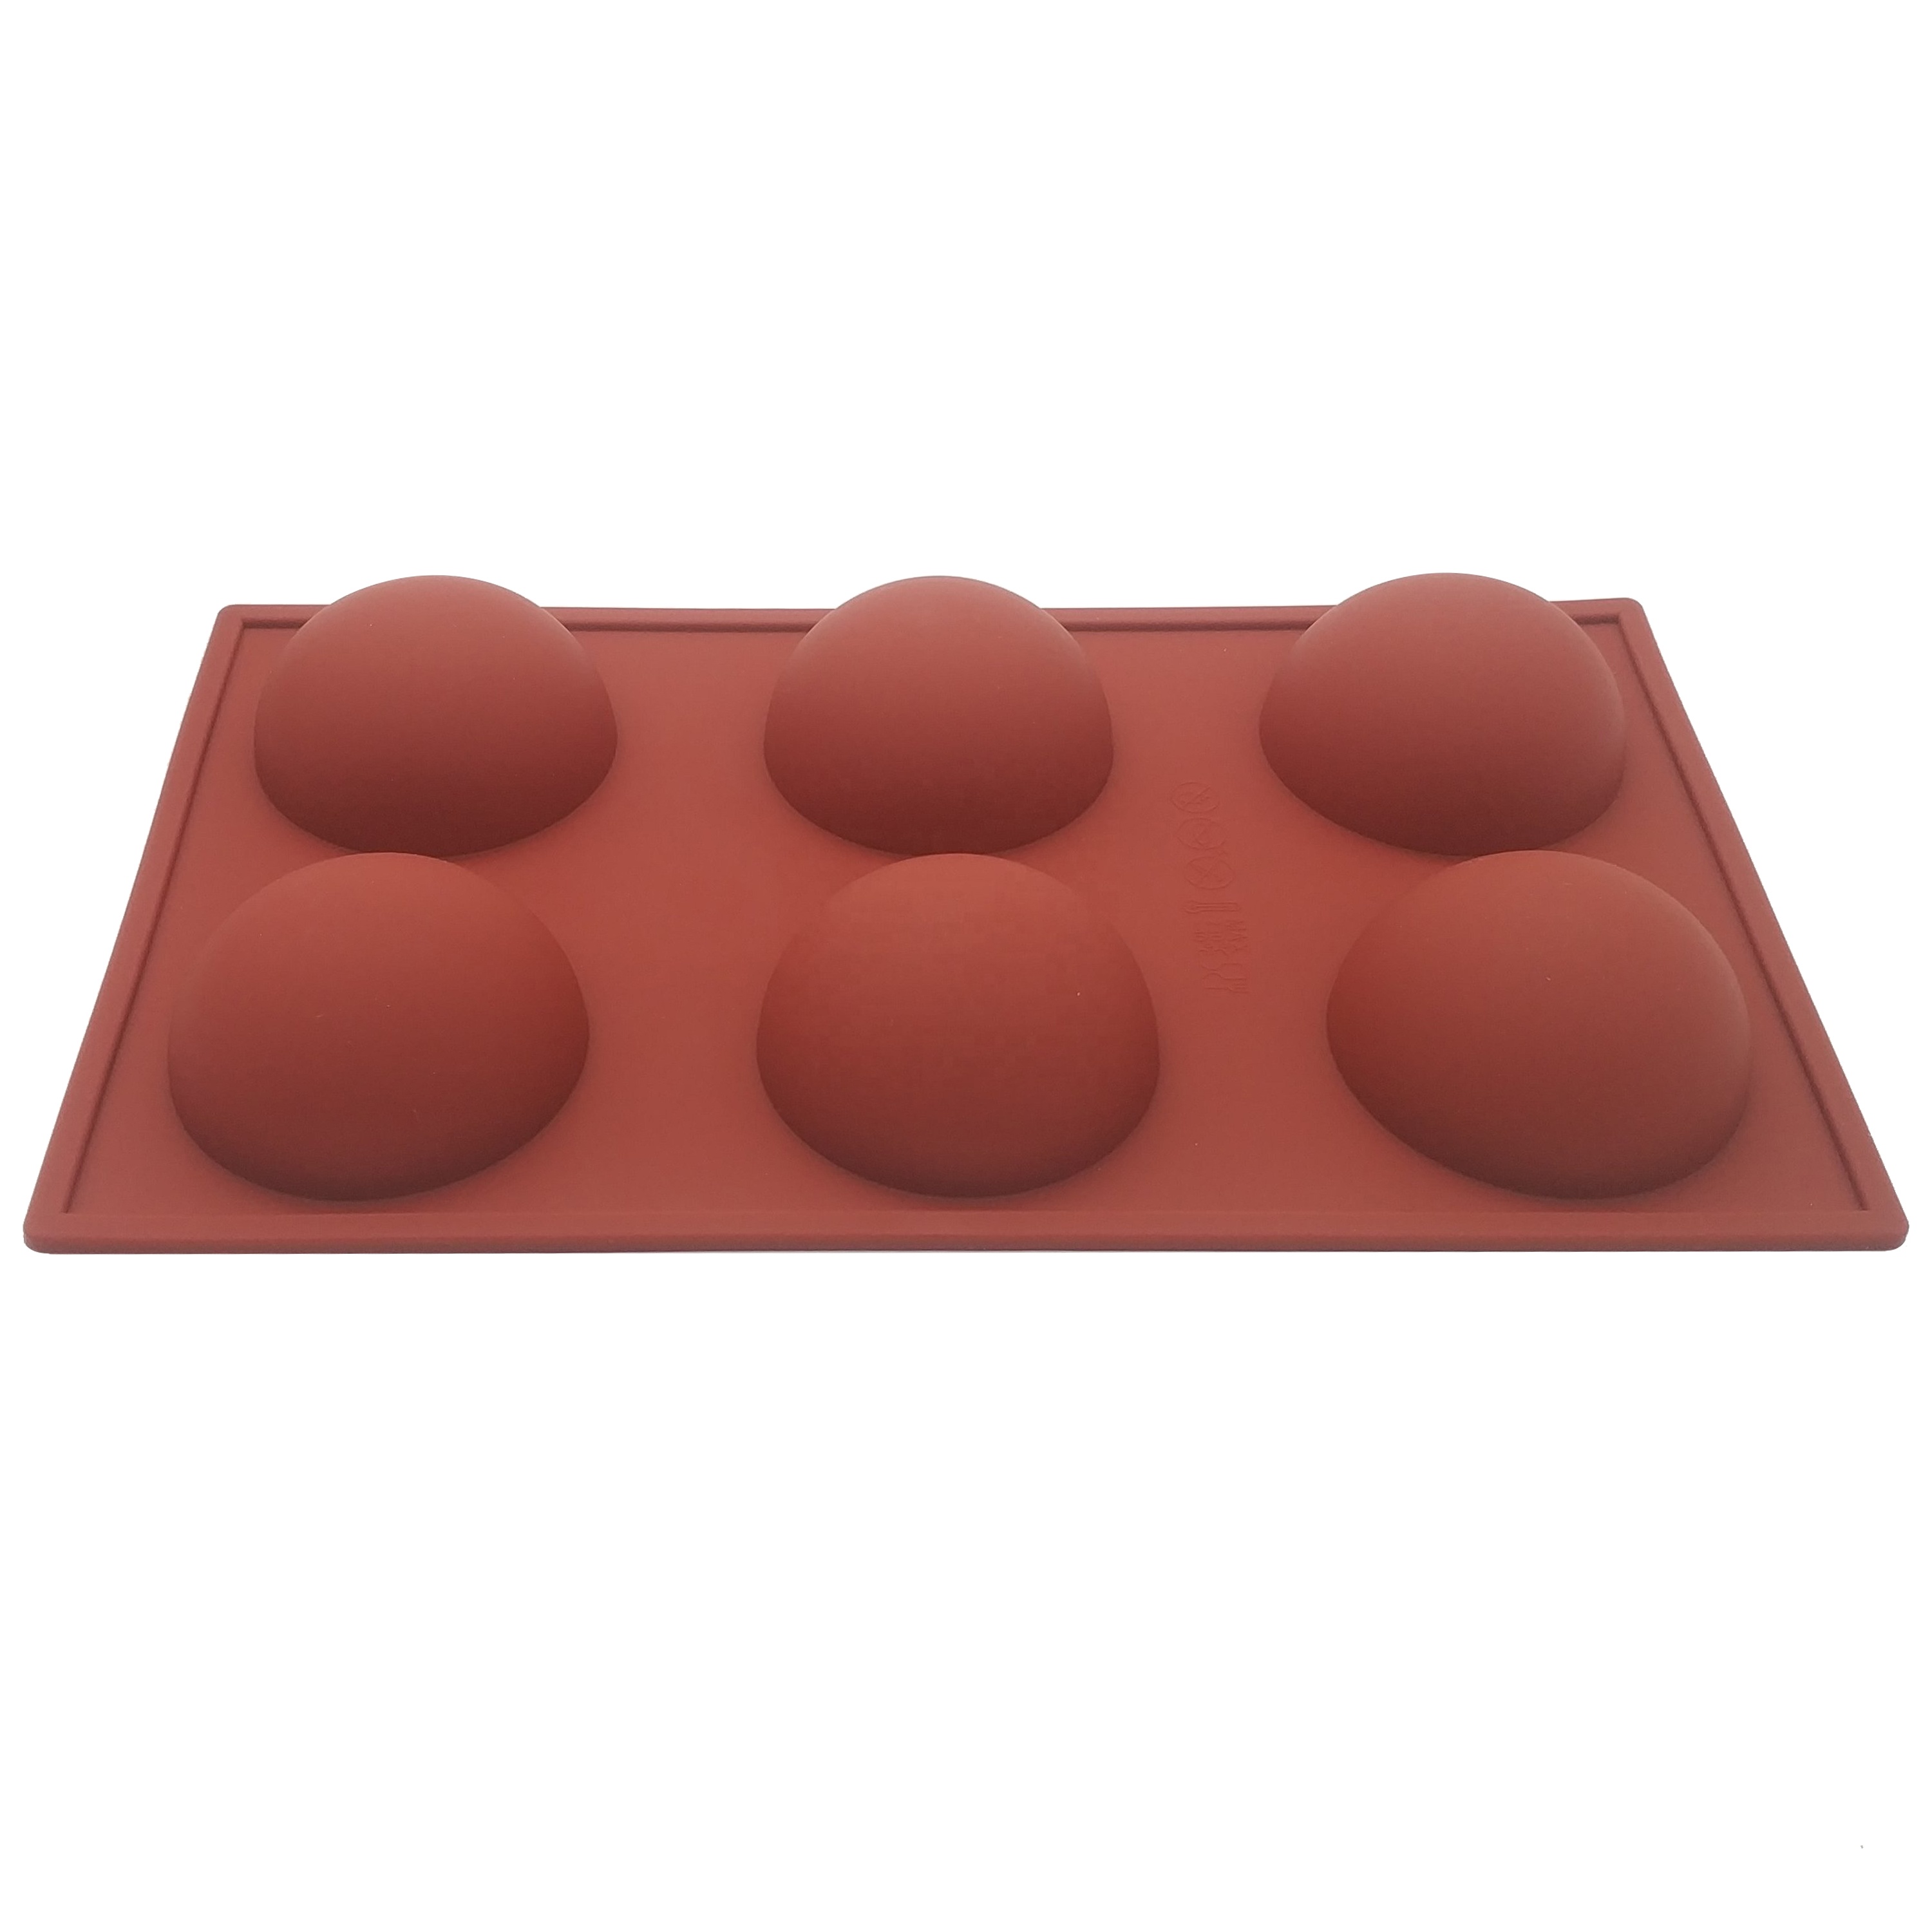 6 Holes Half Sphere Cake Silicone Molds For Chocolate Featured Image